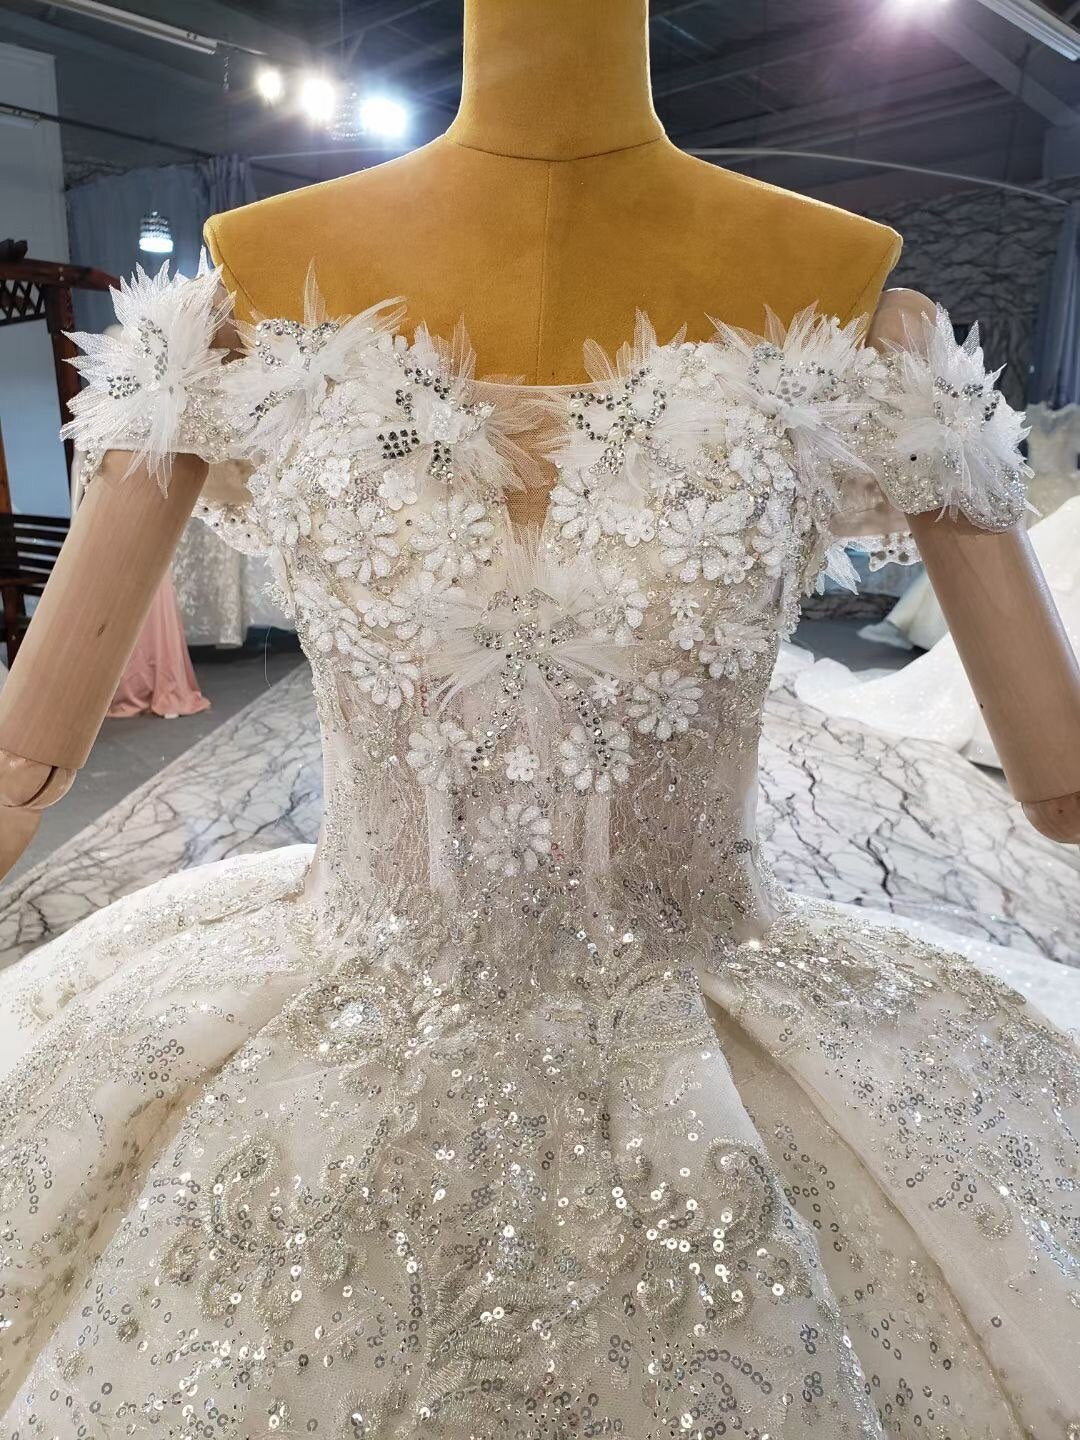 Ball Gown Wedding Dresses Puffy Ballgown Wedding Dress Beads Stones Embellished Top Off The Shoulder Arabic Bridal Gowns Corset - LiveTrendsX